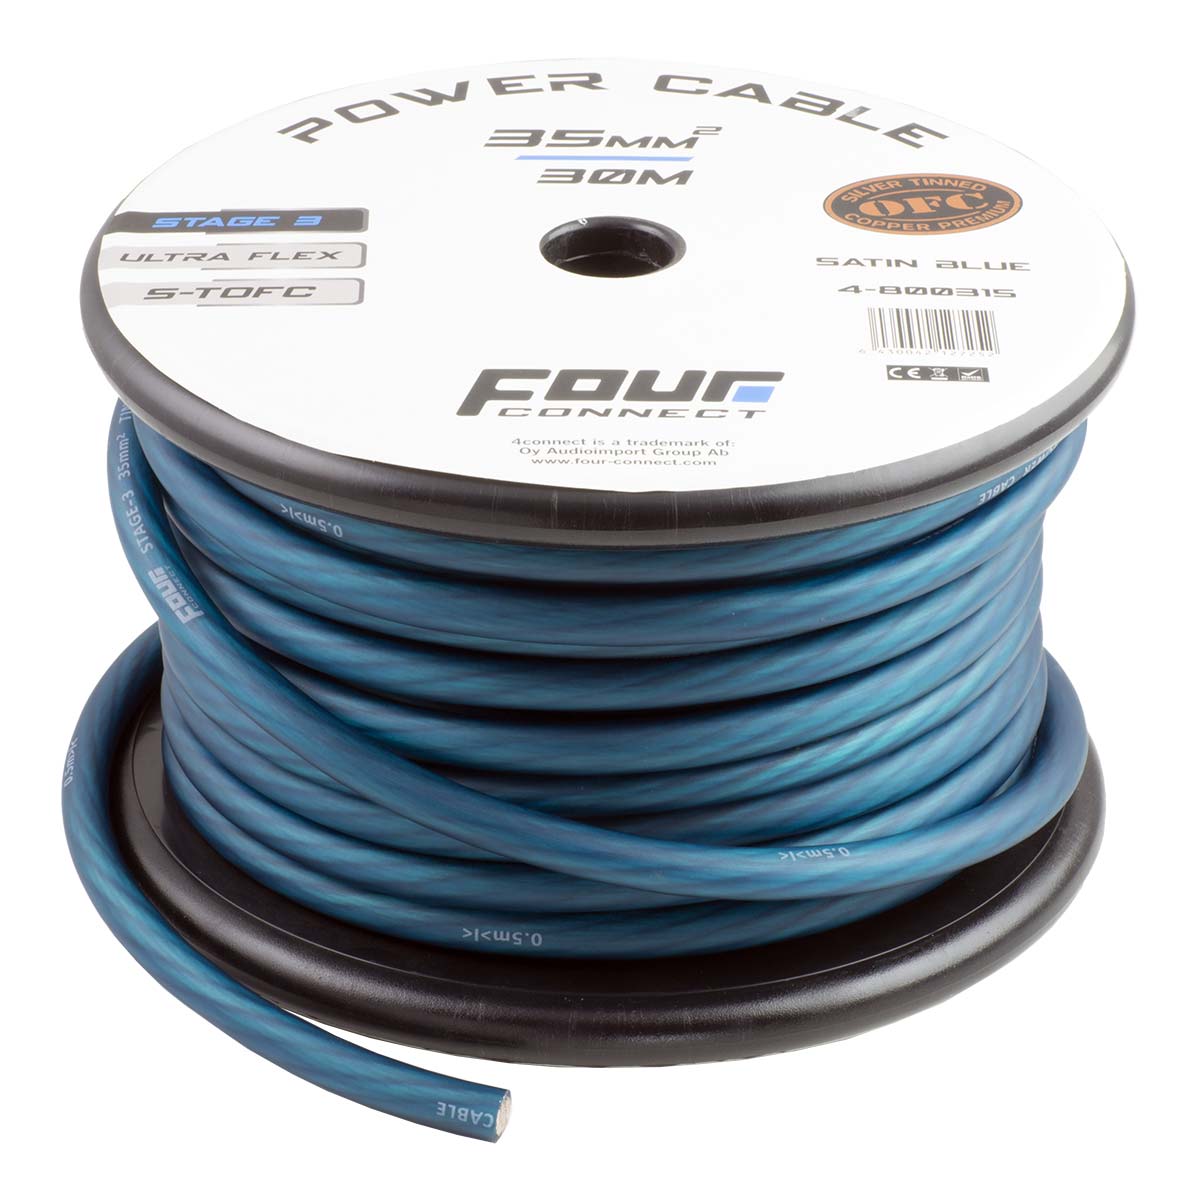 FOUR Connect 4-800315 STAGE3 35mm2 Satin Blue S-TOFC power cable, 30m